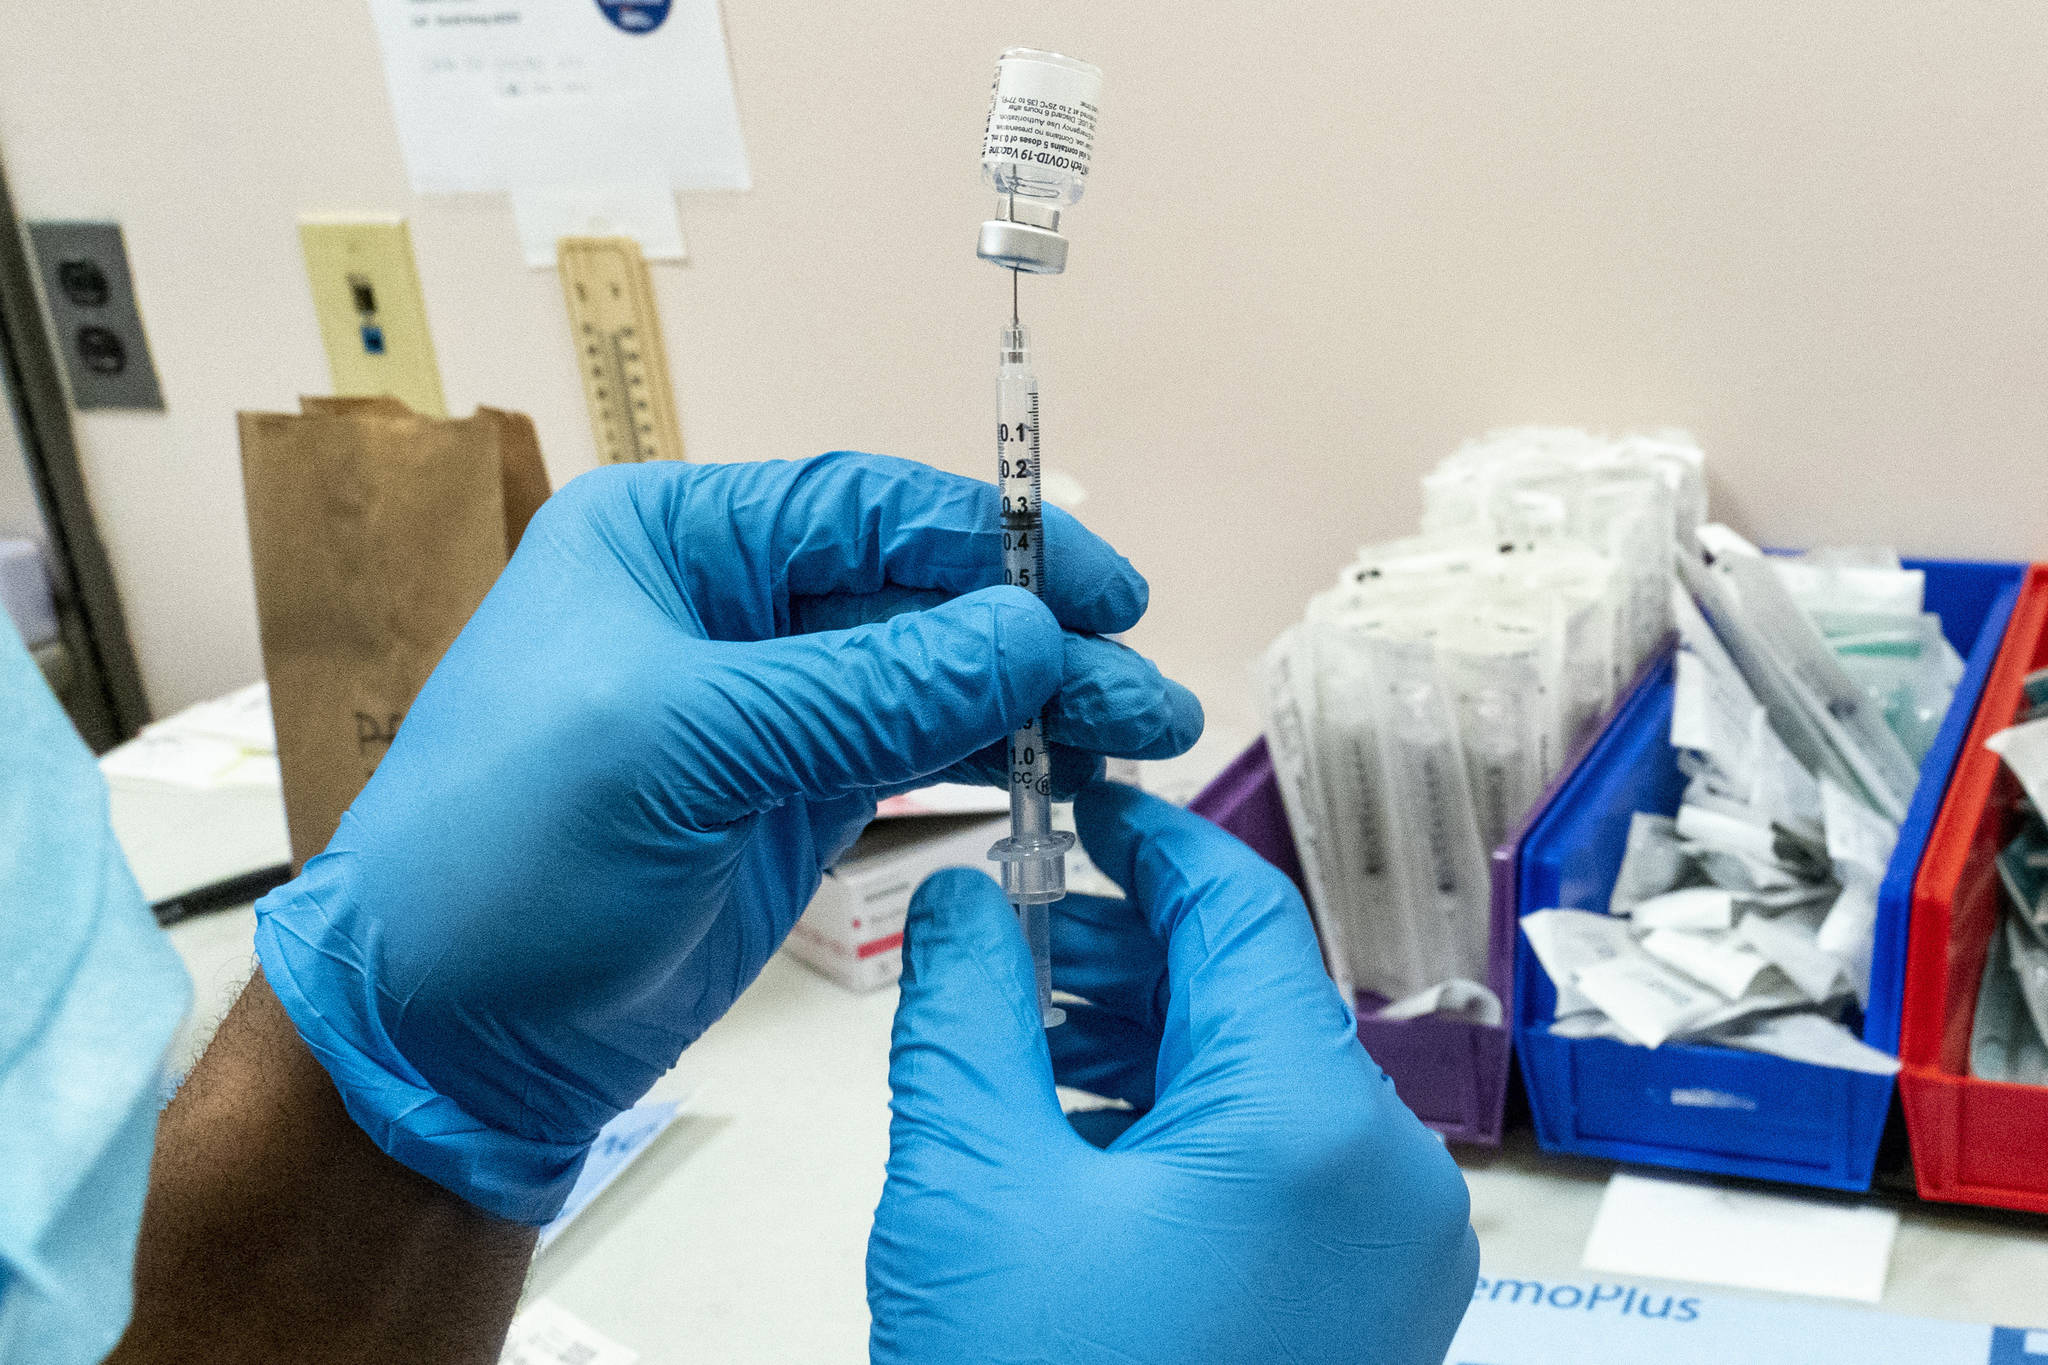 A pharmacist prepares a syringe with Pfizer’s vaccine at a COVID-19 vaccination site in New York. A real-world test of Pfizer’s COVID-19 vaccine in more than half a million people has confirmed it’s highly effective at preventing serious illness or death, even after one dose, according to a report released on Wednesday, Feb. 24, 2021. (AP Photo / Mary Altaffer)